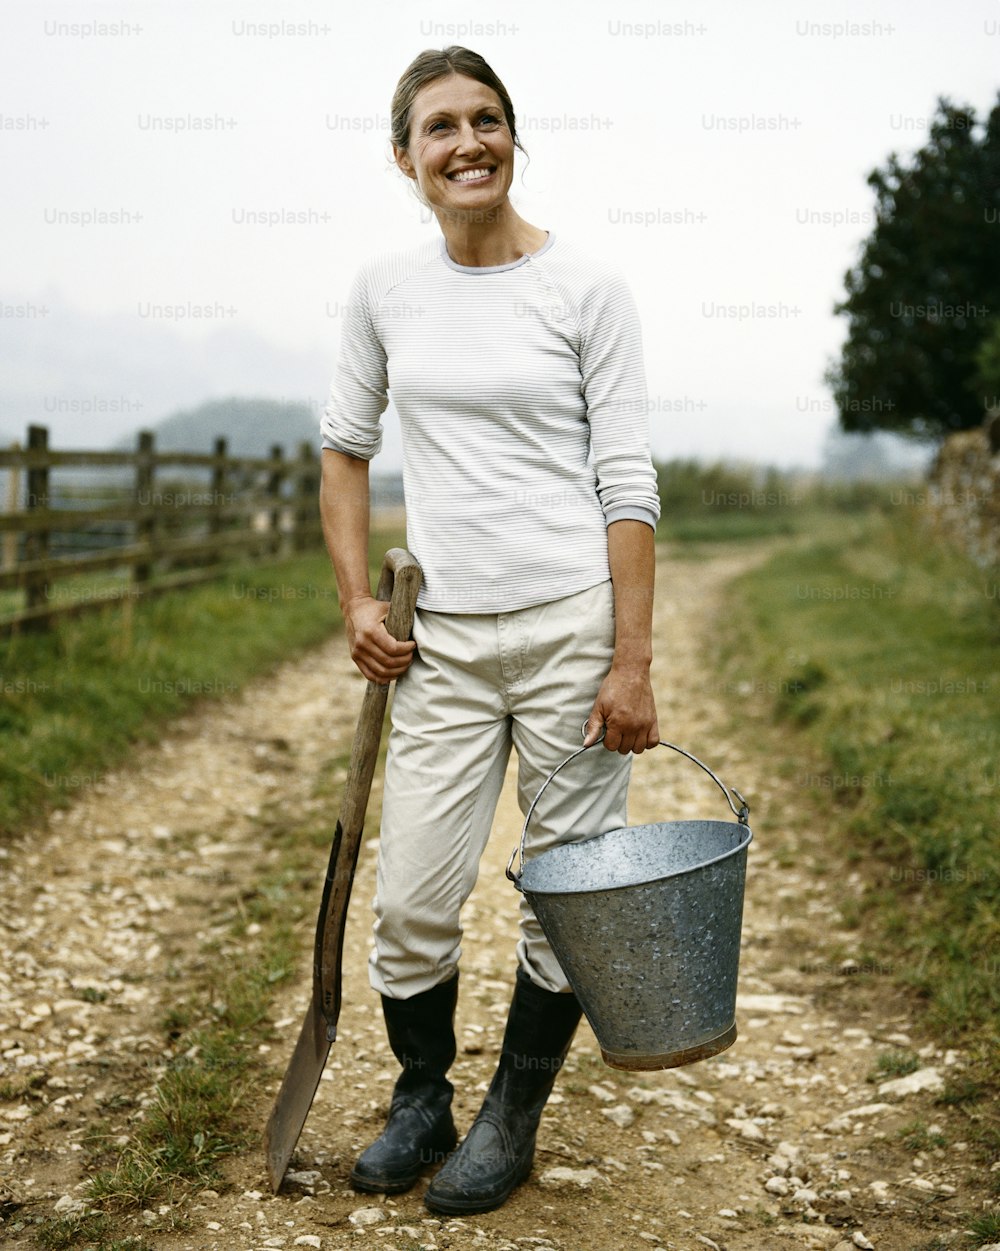 a woman standing on a dirt road holding a bucket and a shovel